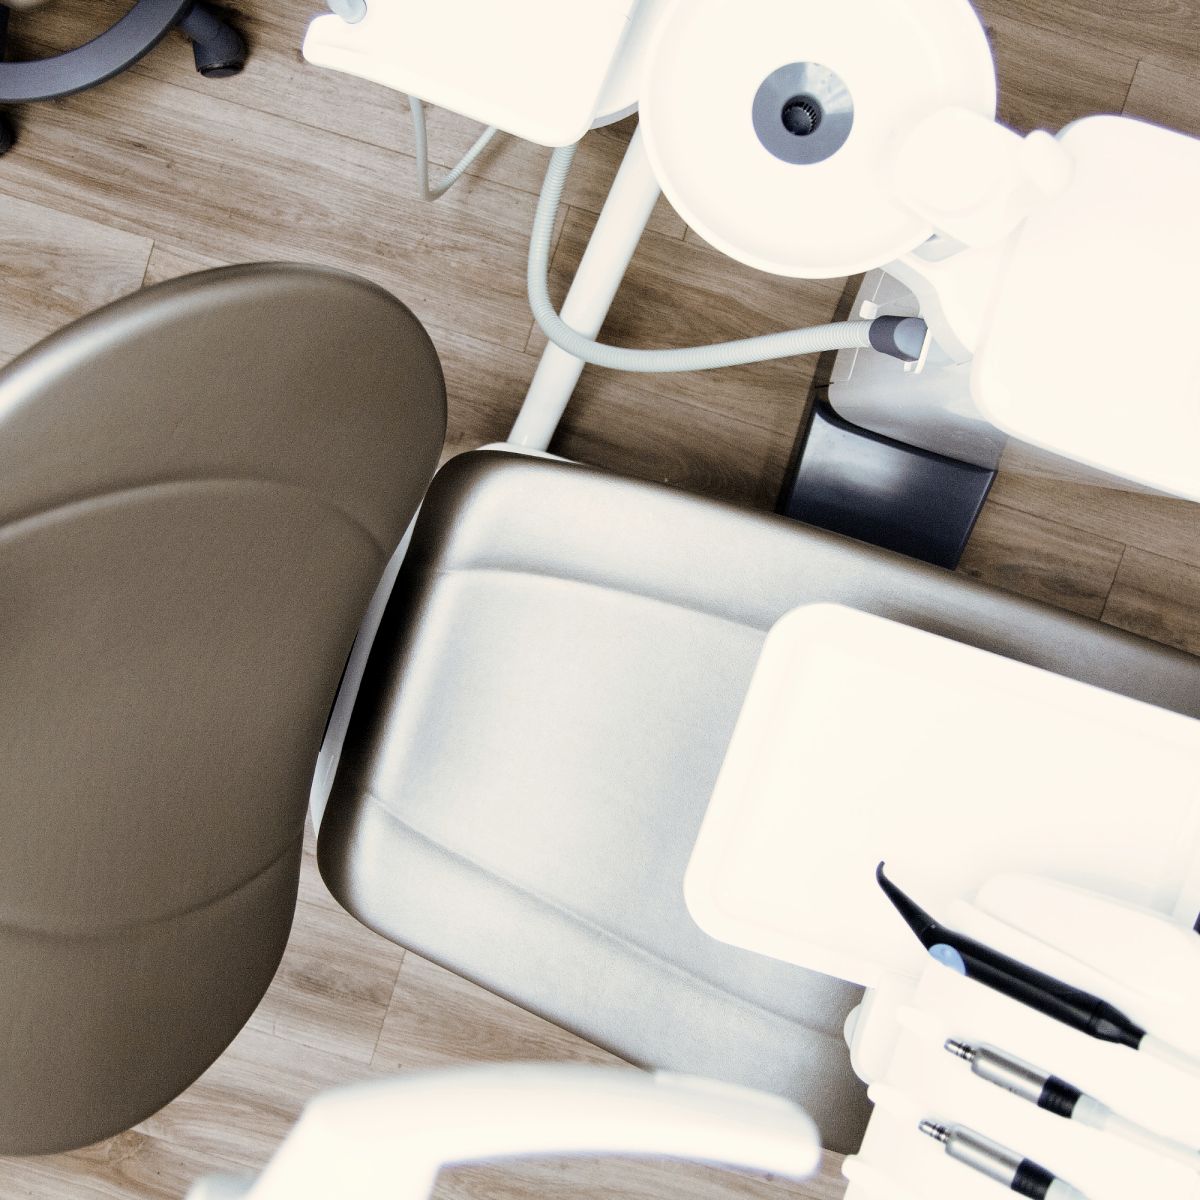 Dental chair from above